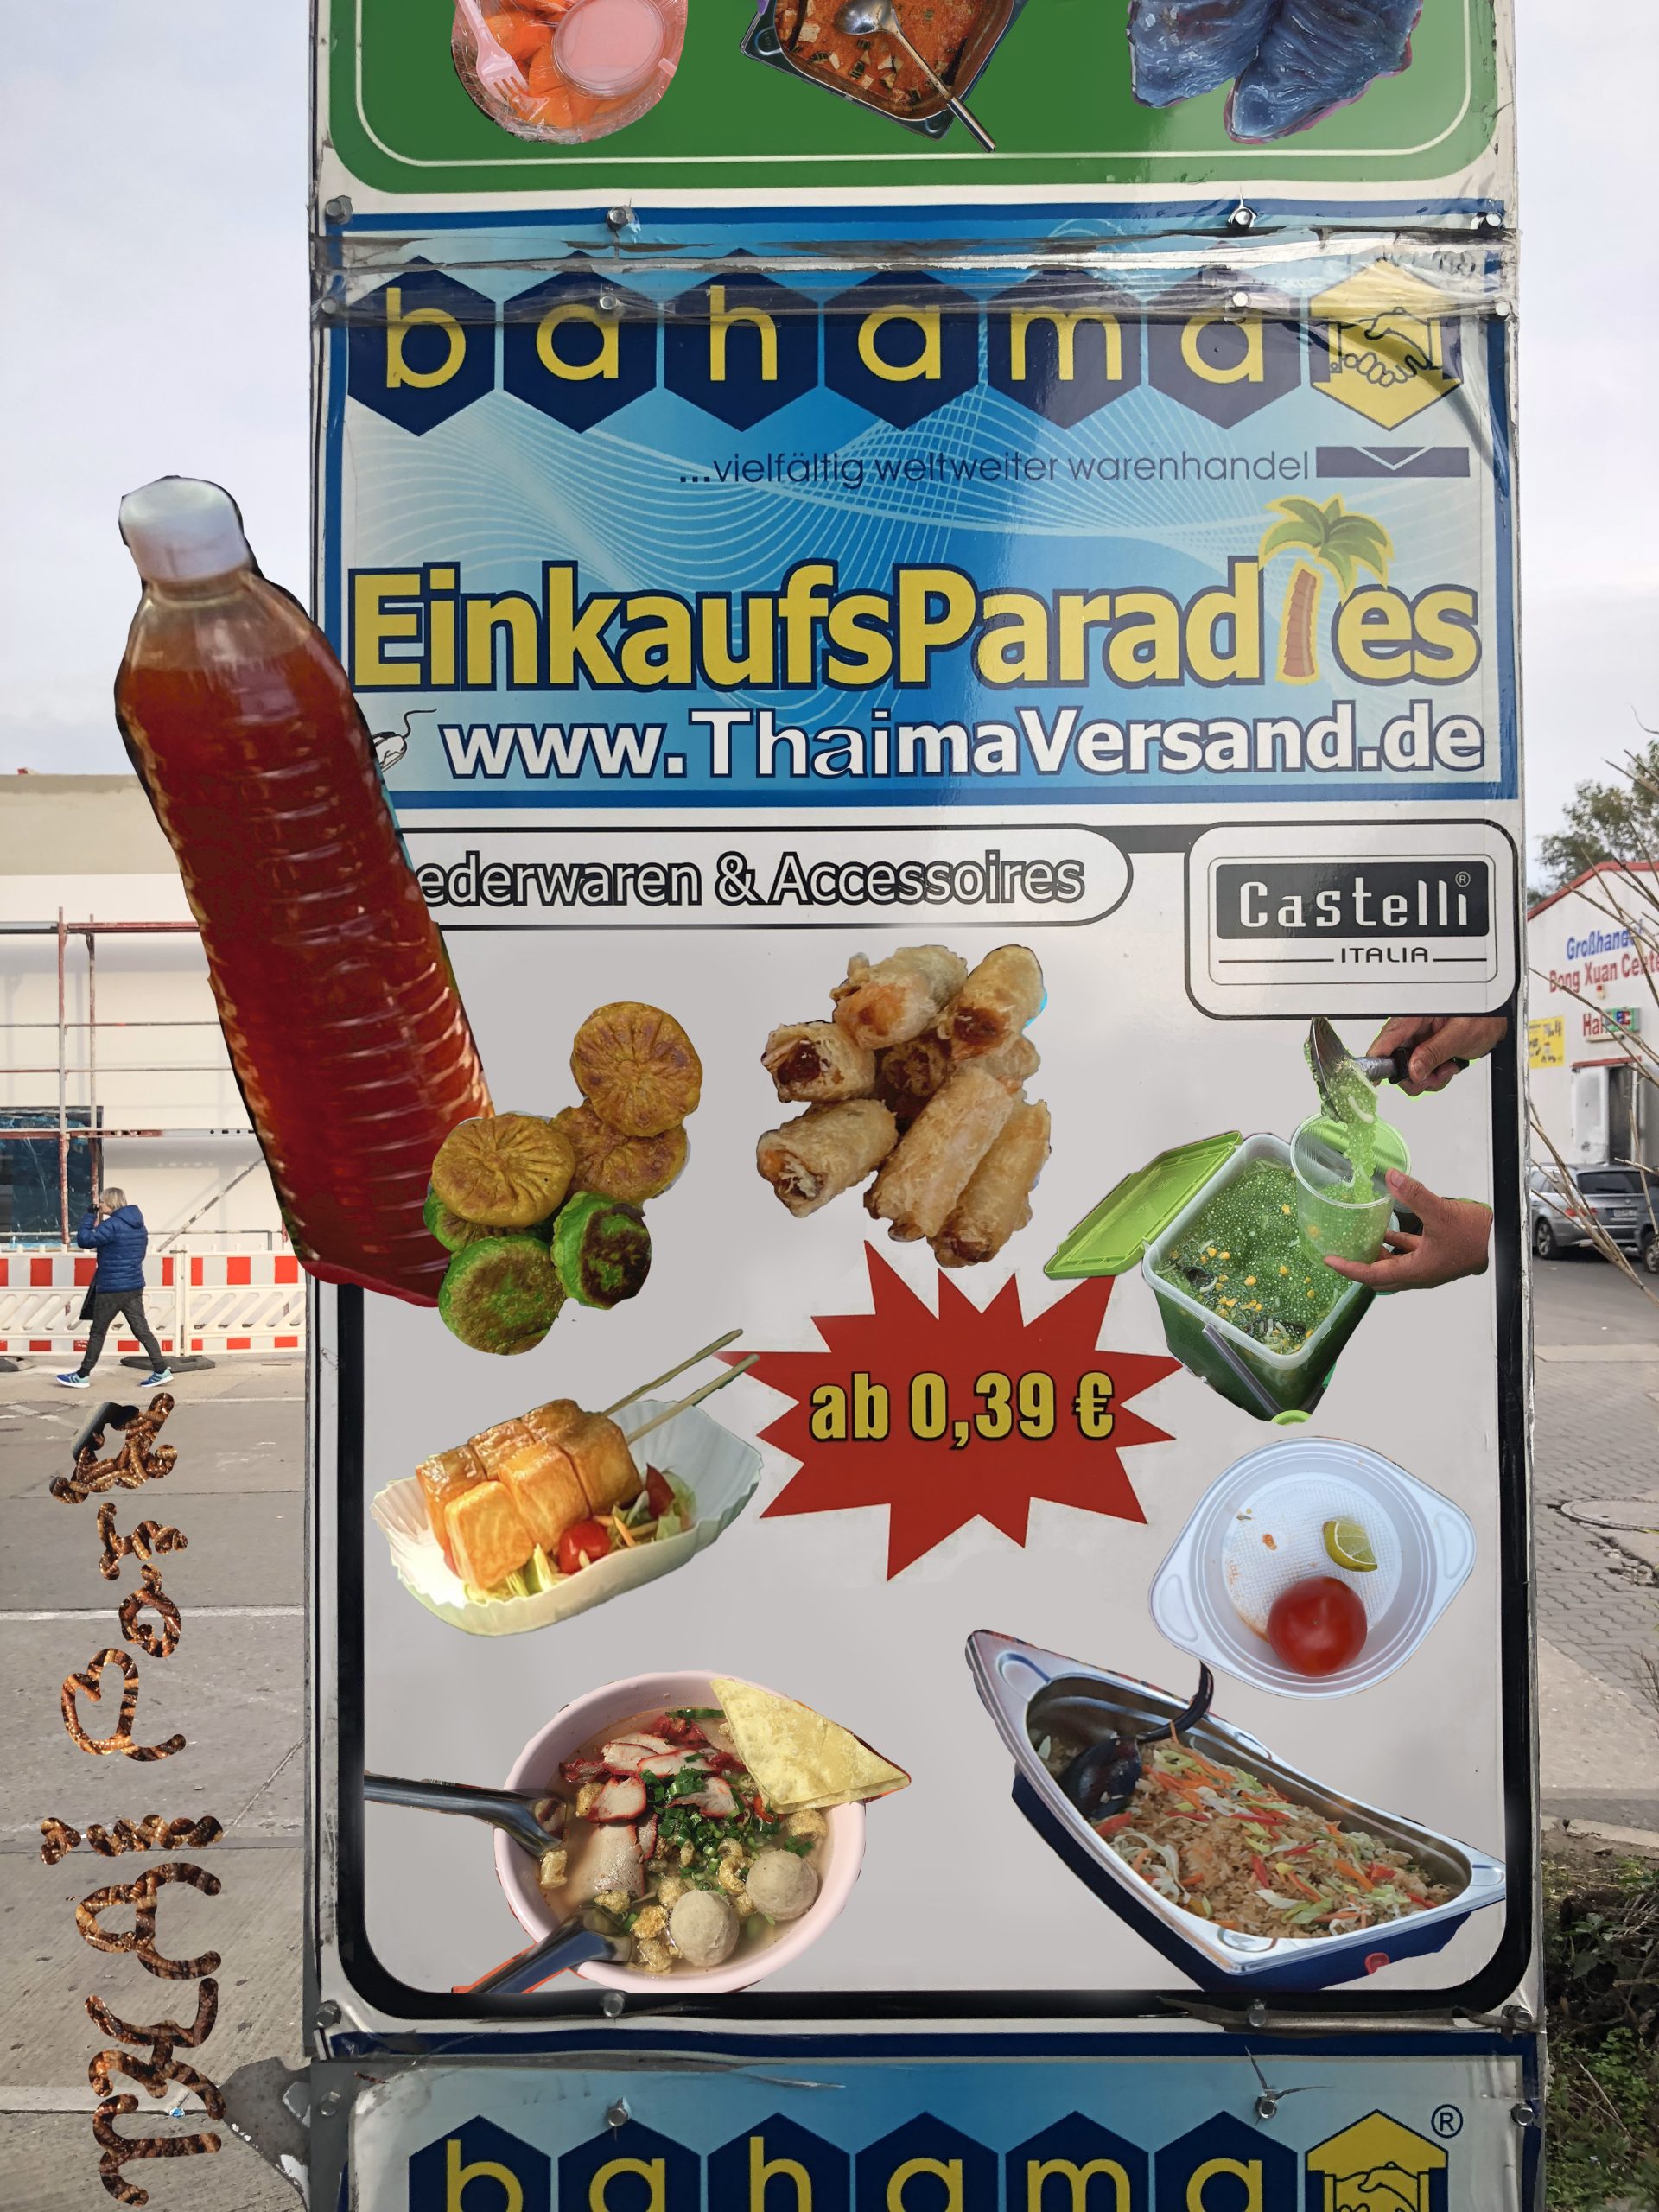 A sign in front of the Dong Xuan Center in Lichtenberg. On the sign different Asian food and a writing with “Thai Park” and a red sauce bottle are displayed. The sign says “bahama, diverse worldwide merchandise trade, shopping paradise, www.ThaimaVersand.de, Castelli italia, from 0,39€”.